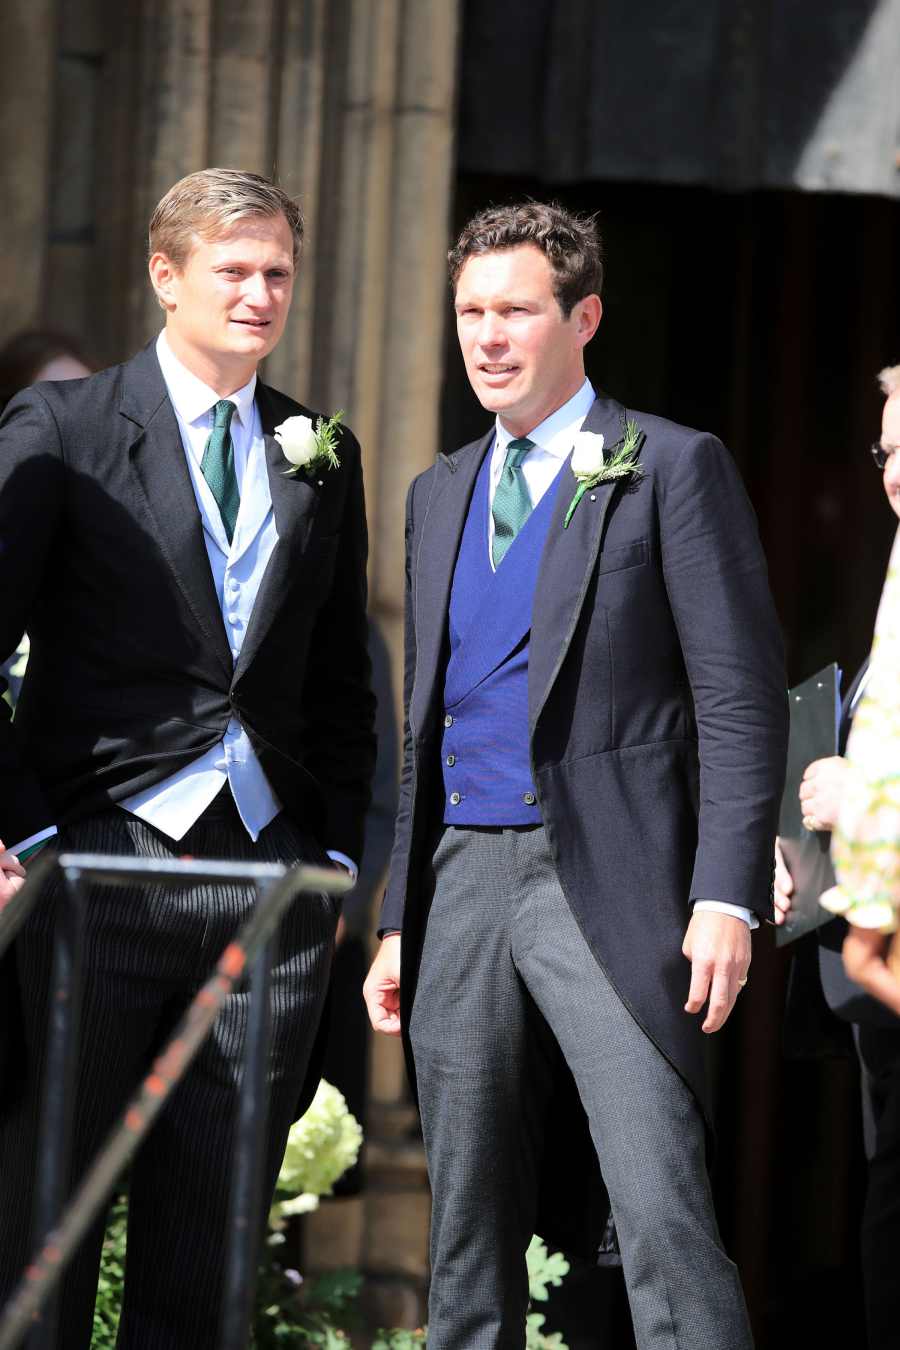 Jack Brooksbank Katy Perry, Orlando Bloom, Princess Beatrice and More Celebrity Guests Attend Ellie Goulding's Wedding